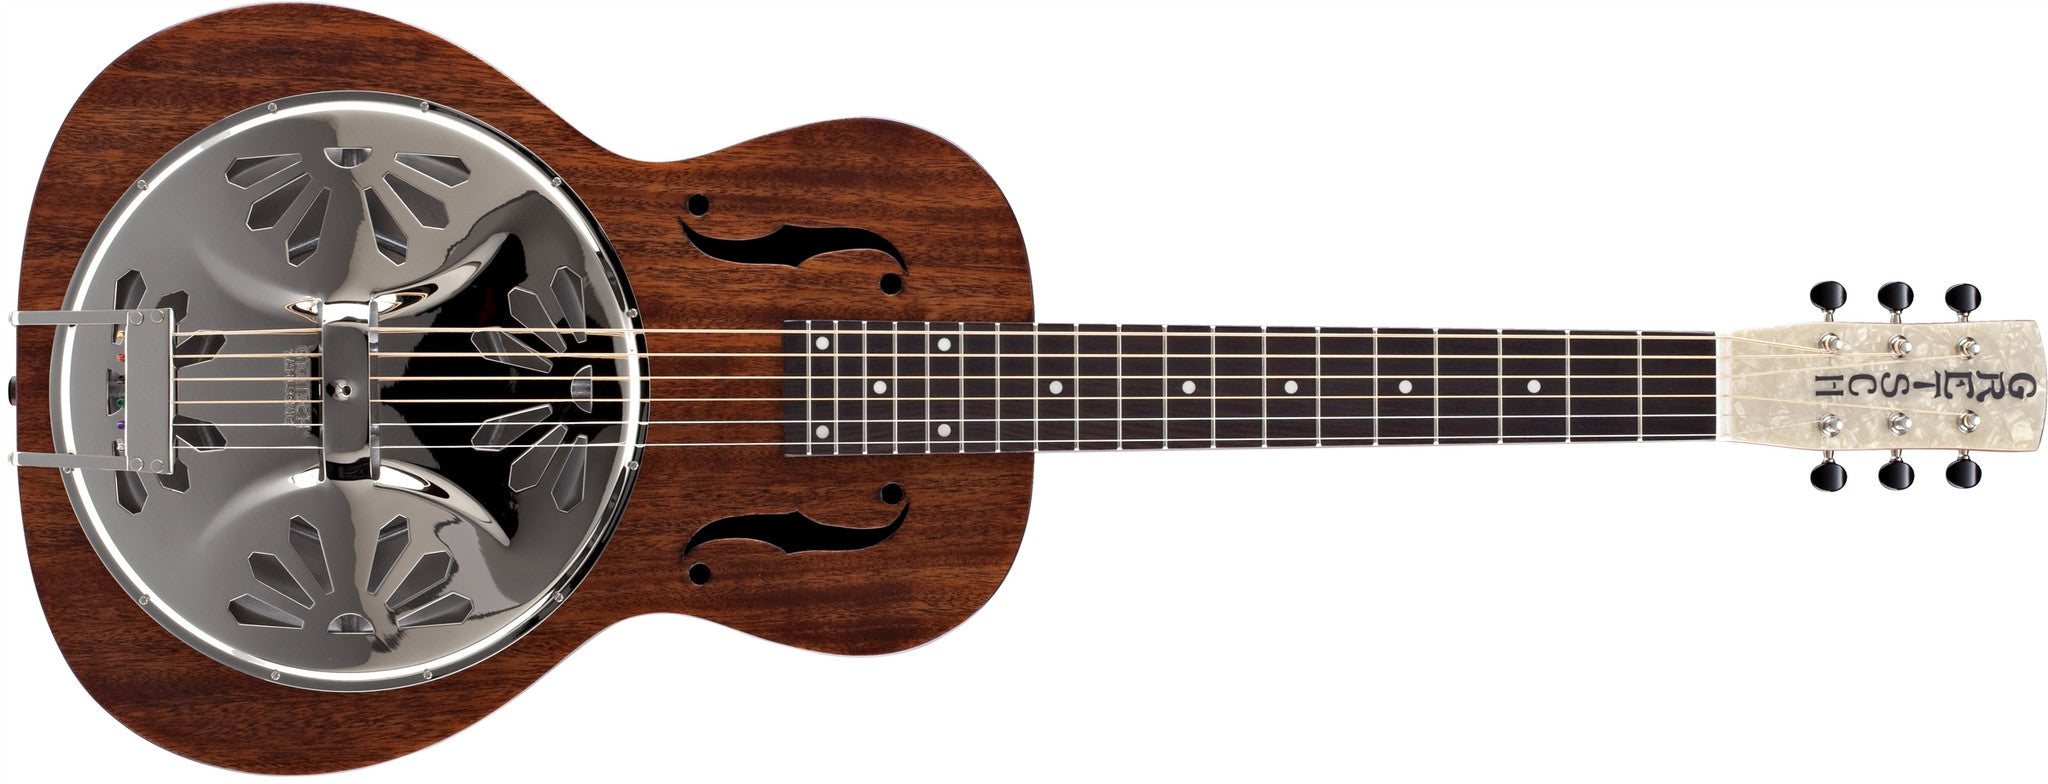 Gretsch G9210 Boxcar Square-Neck, Rosewood Fingerboard, Natural 2715020521 - L.A. Music - Canada's Favourite Music Store!